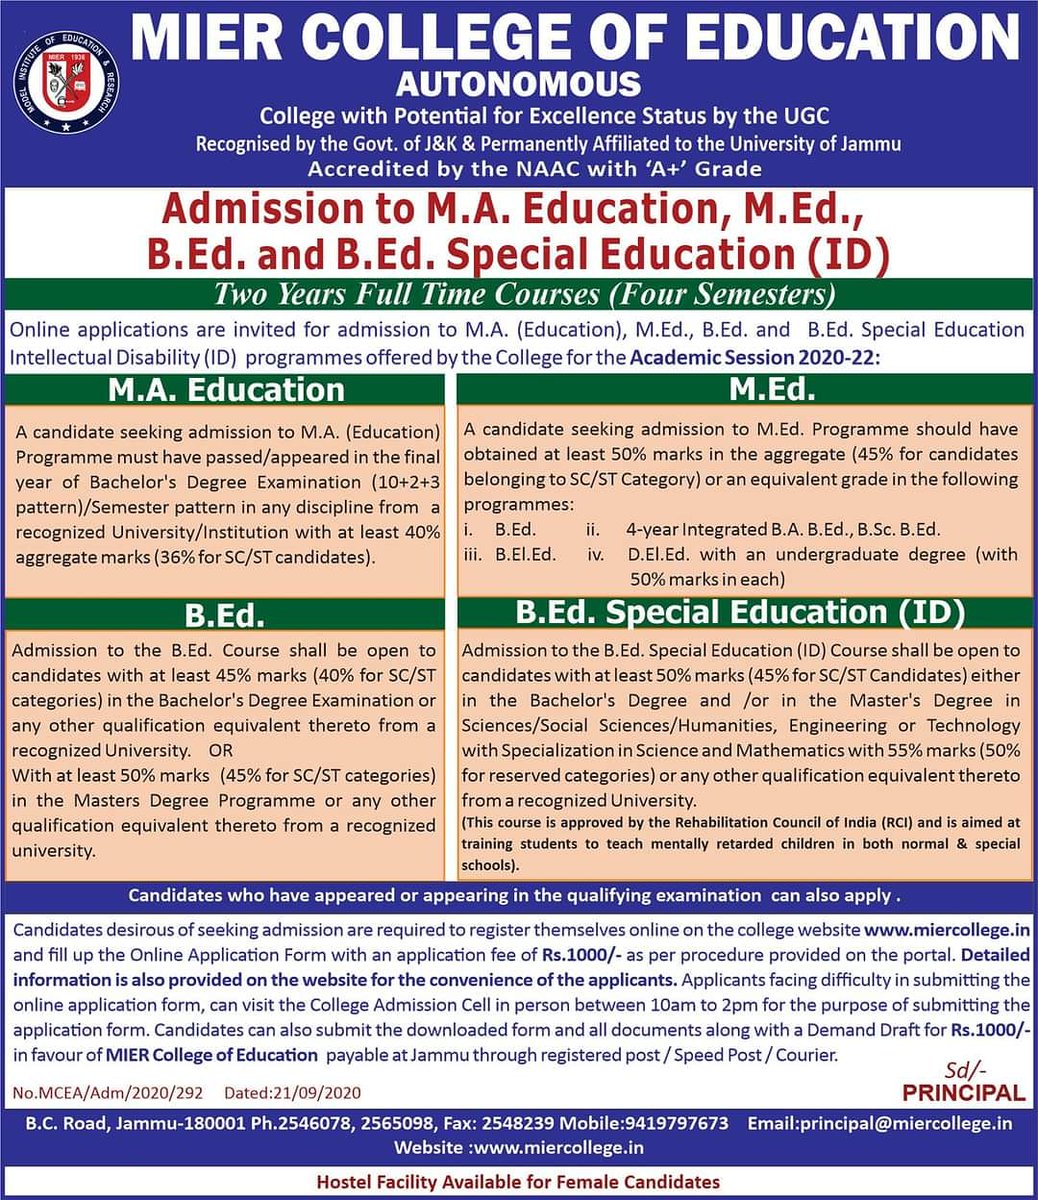 MIER College of Education announces admissions for B.Ed., B.Ed.(Special Education), M.Ed. and M.A Education for the new session 2020-2022.
#AdmissionOpen2020